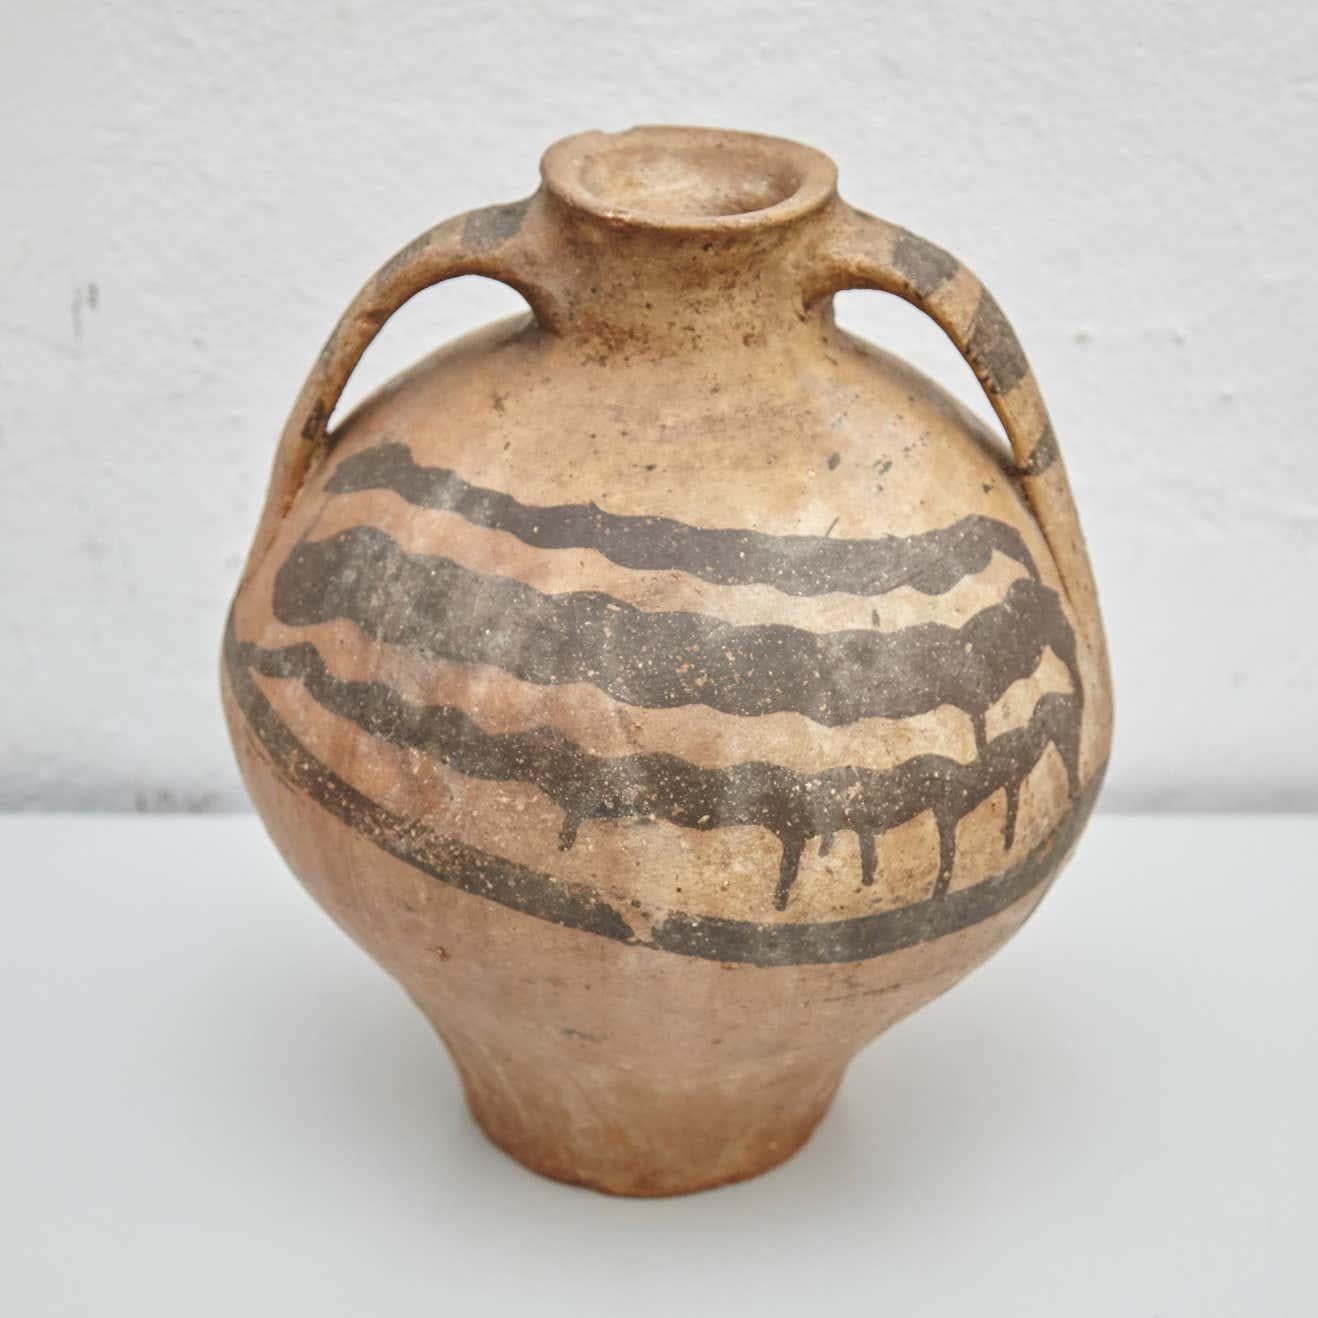 Traditional rustic hand painted ceramic vase

Manufactured in Spain, circa 1940.

In original condition, with minor wear consistent with age and use, preserving a beautiful patina.